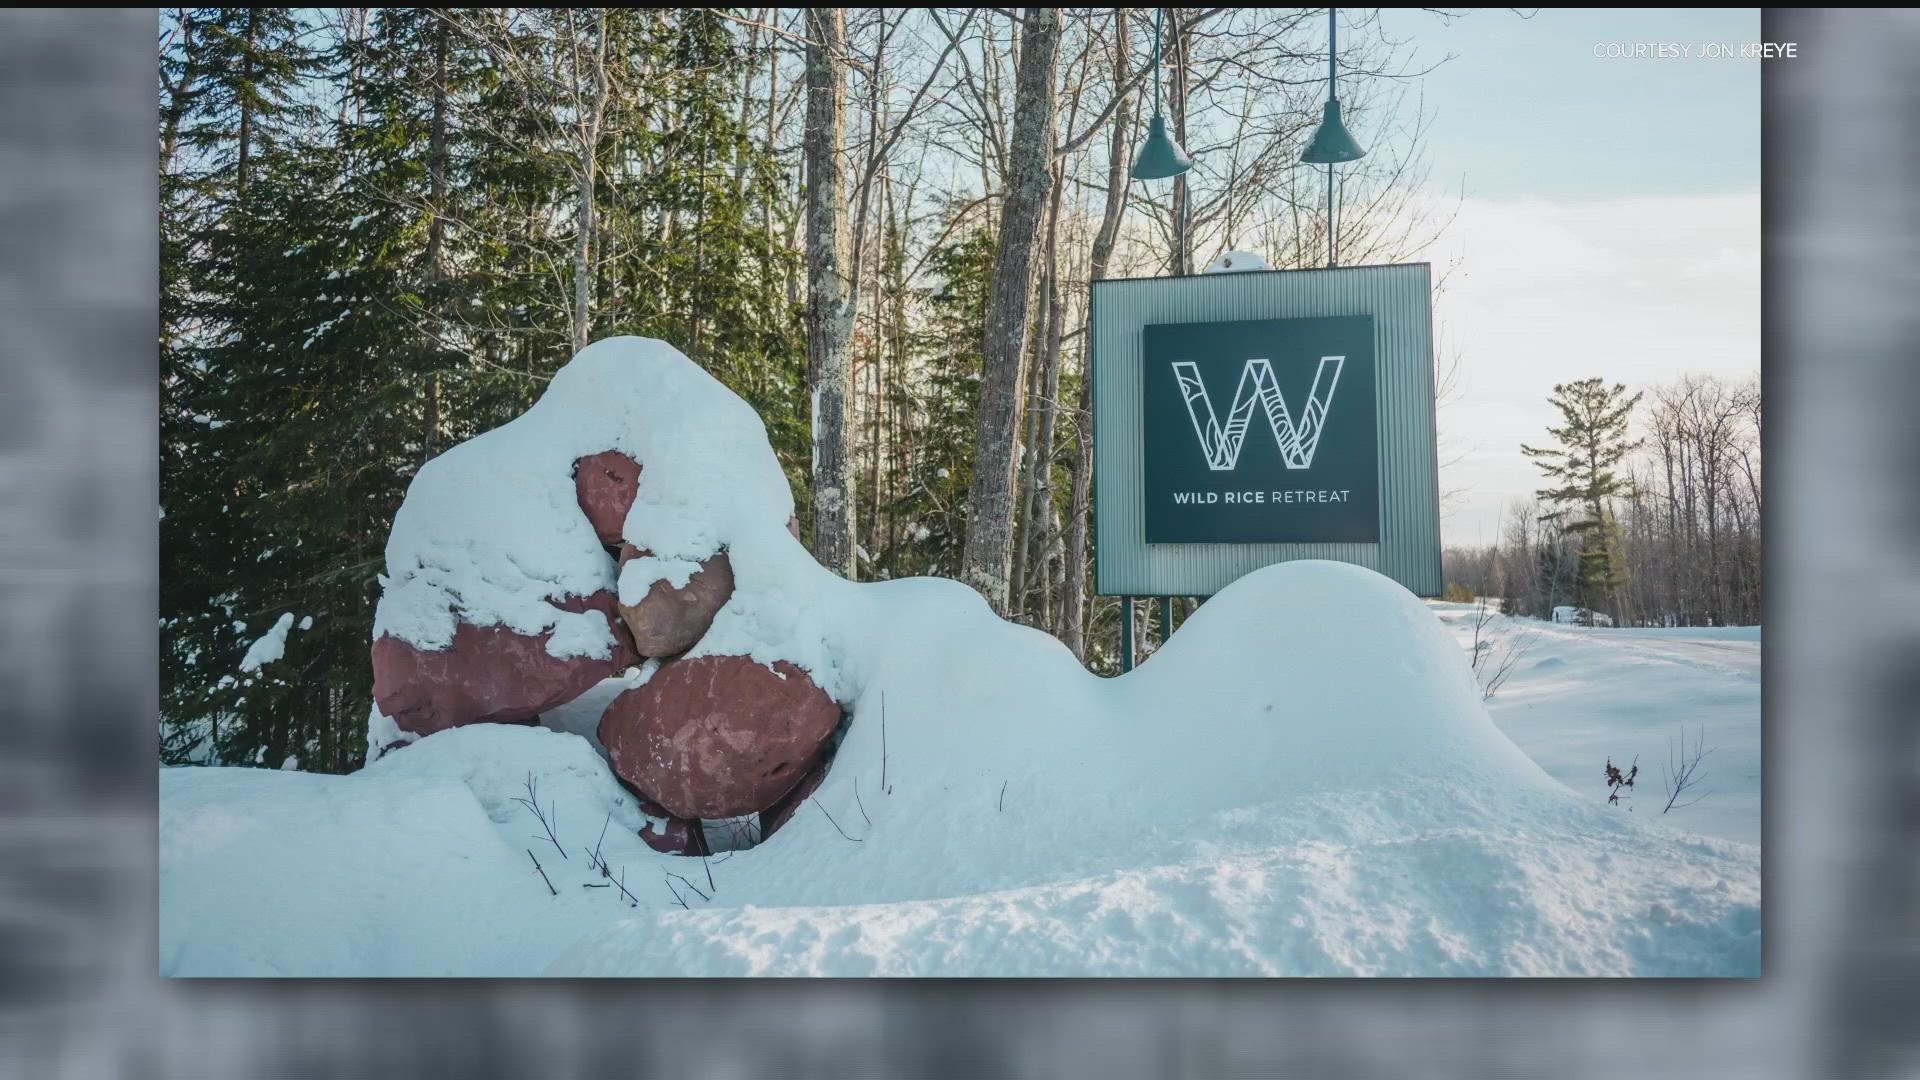 Heidi Zimmer, founder of the Wild Rice Retreat, joined the KARE 11 Saturday show to talk about the new arts and wellness resort in Bayfield, Wisconsin.